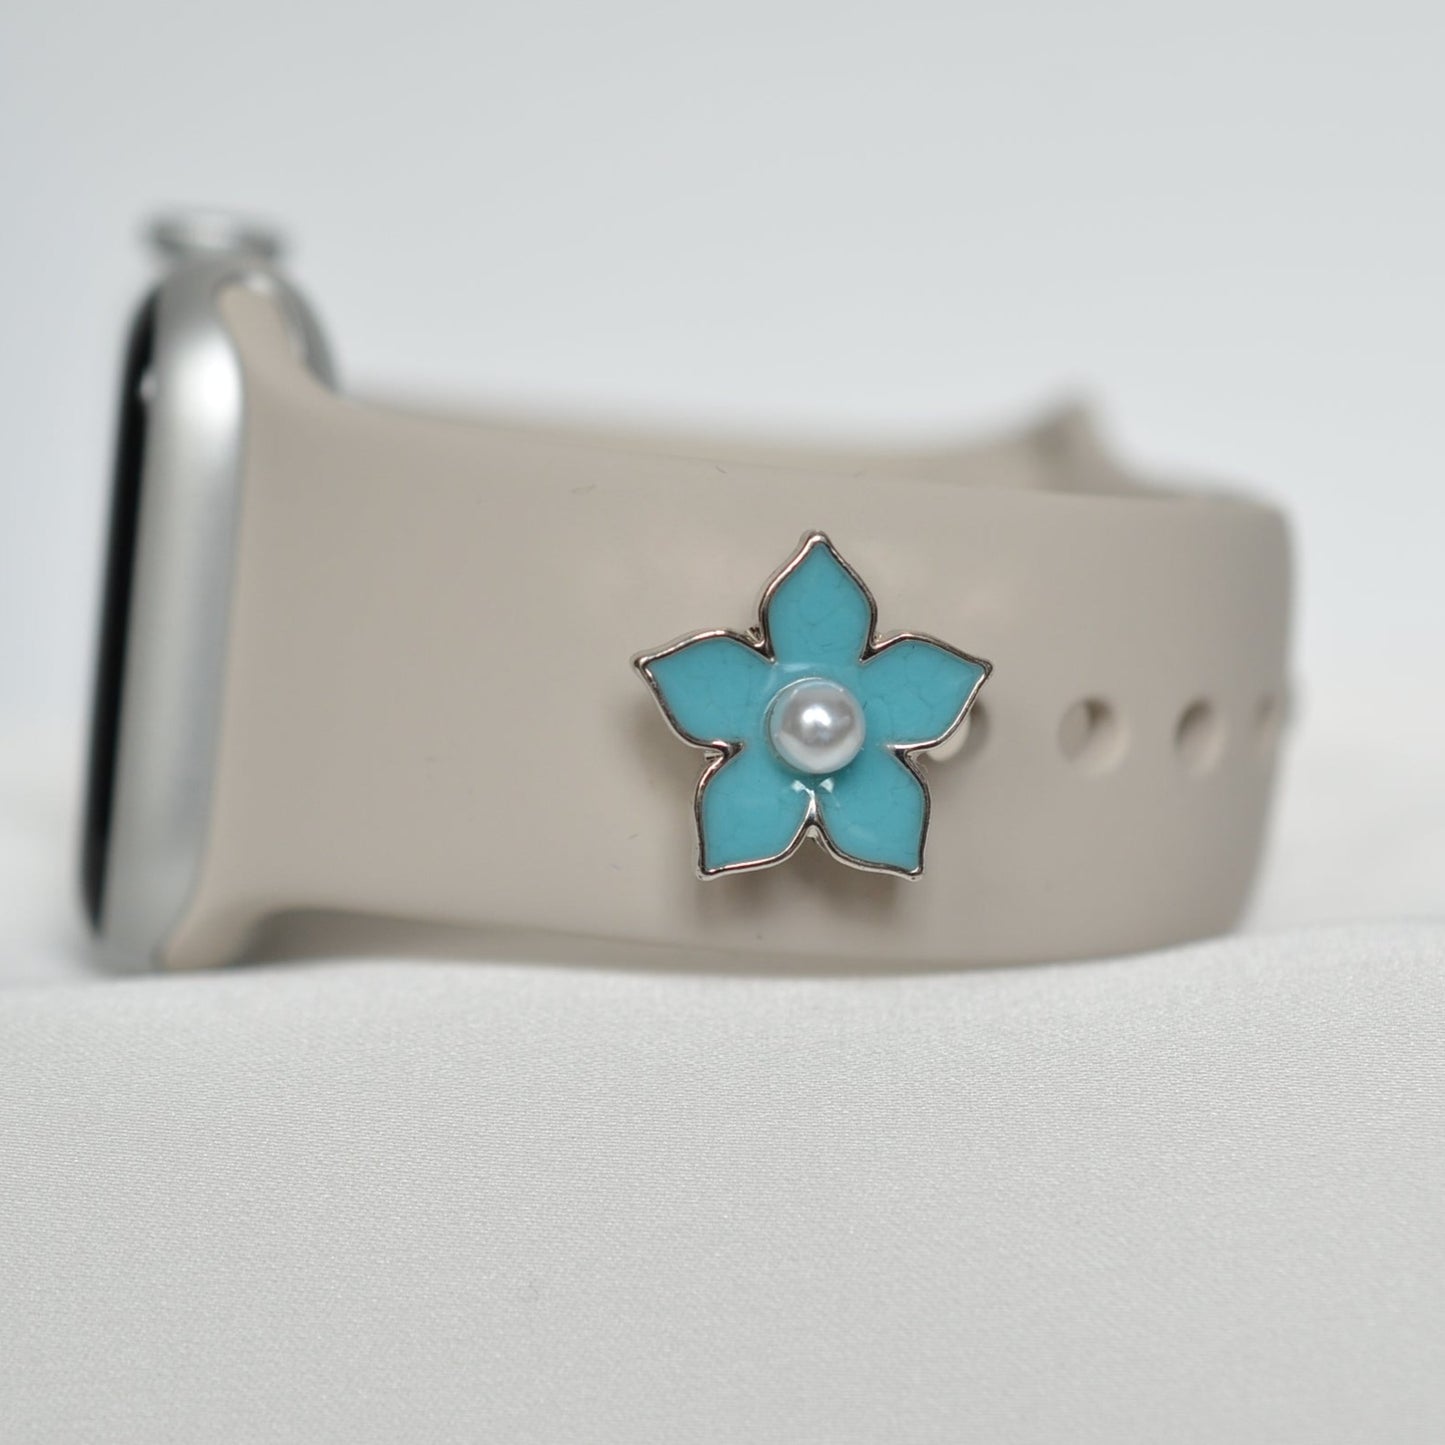 Blue Flower with Pearl Center Charm for Belt, Bag and Watch Bands